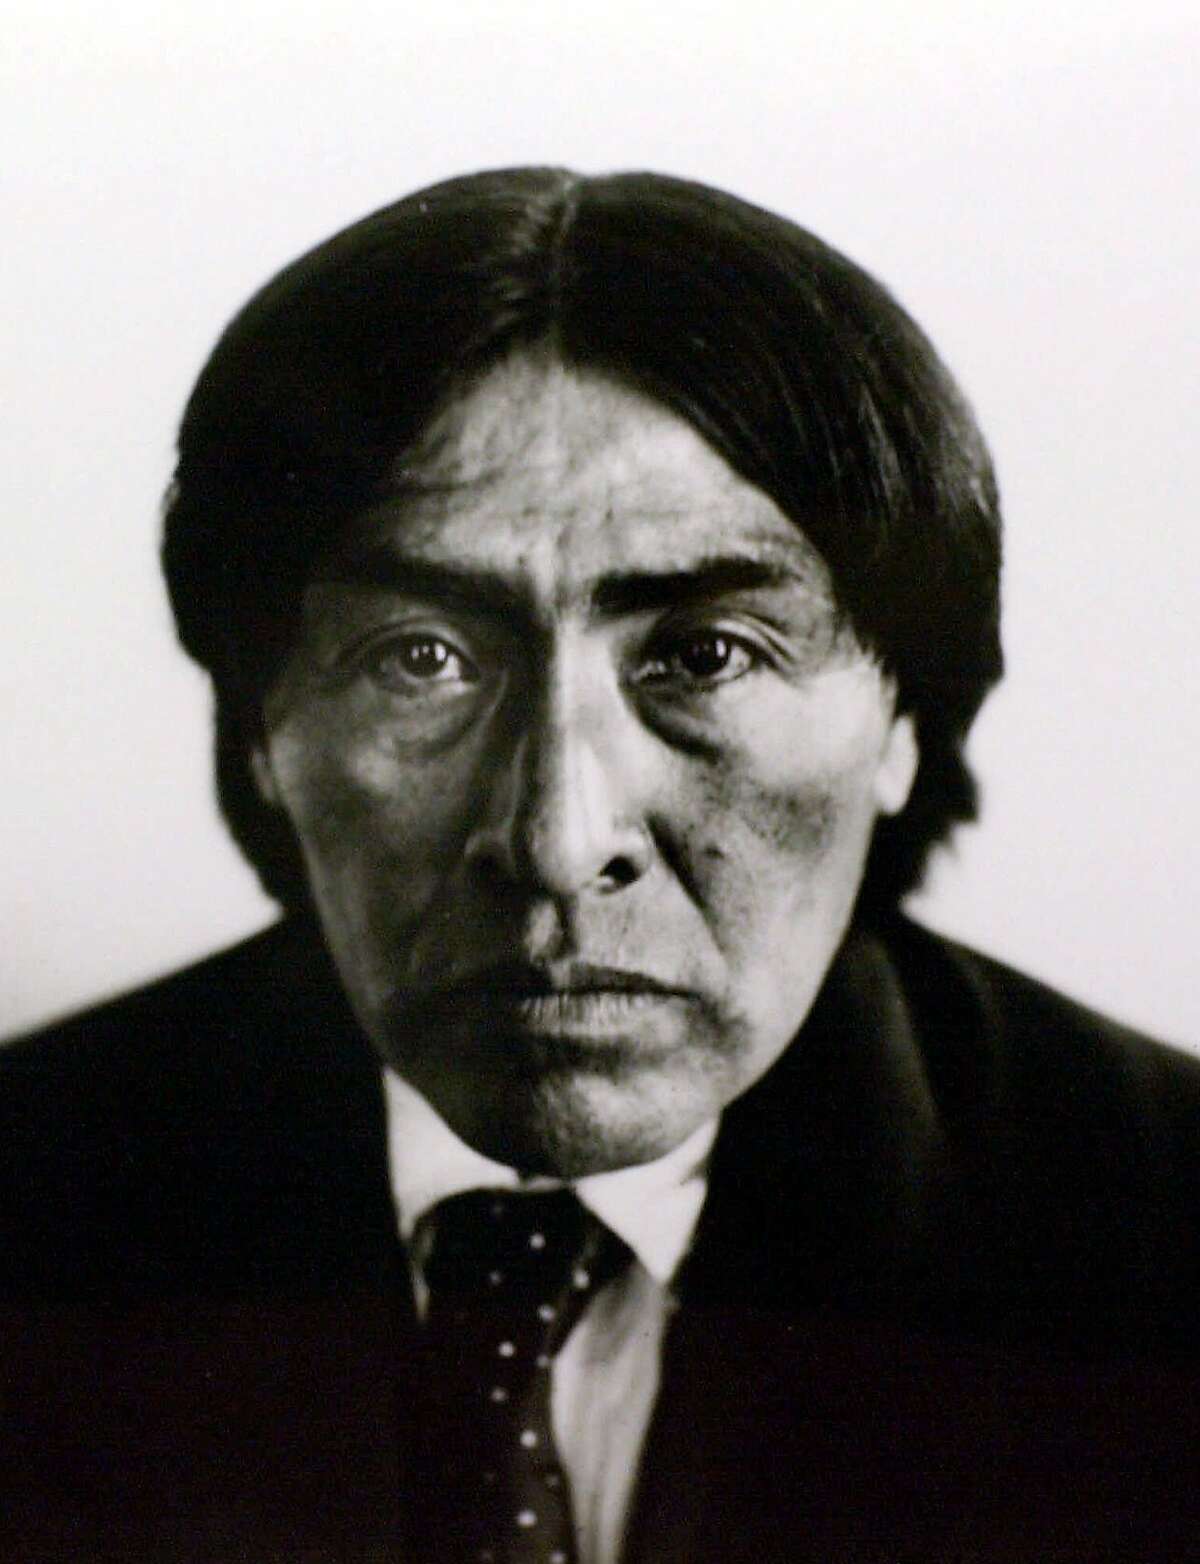 FILE--An Indian known as Ishi is shown in this July 1912 portrait made in San Francisco. Nearly 90 years after an Indian known as Ishi walked out of the wilderness and was put on display as the "Last Wild Man in North America," his brain is being brought back home from the Smithsonian Institution to California for a proper burial. (AP Photo/Phoebe Hearst Museum of Anthropology/UC Berkeley Regents, E.H. Kemp, File) Ran on: 11-13-2011 Ishi, the last Southern Yana Indian, wasn't the best singer.